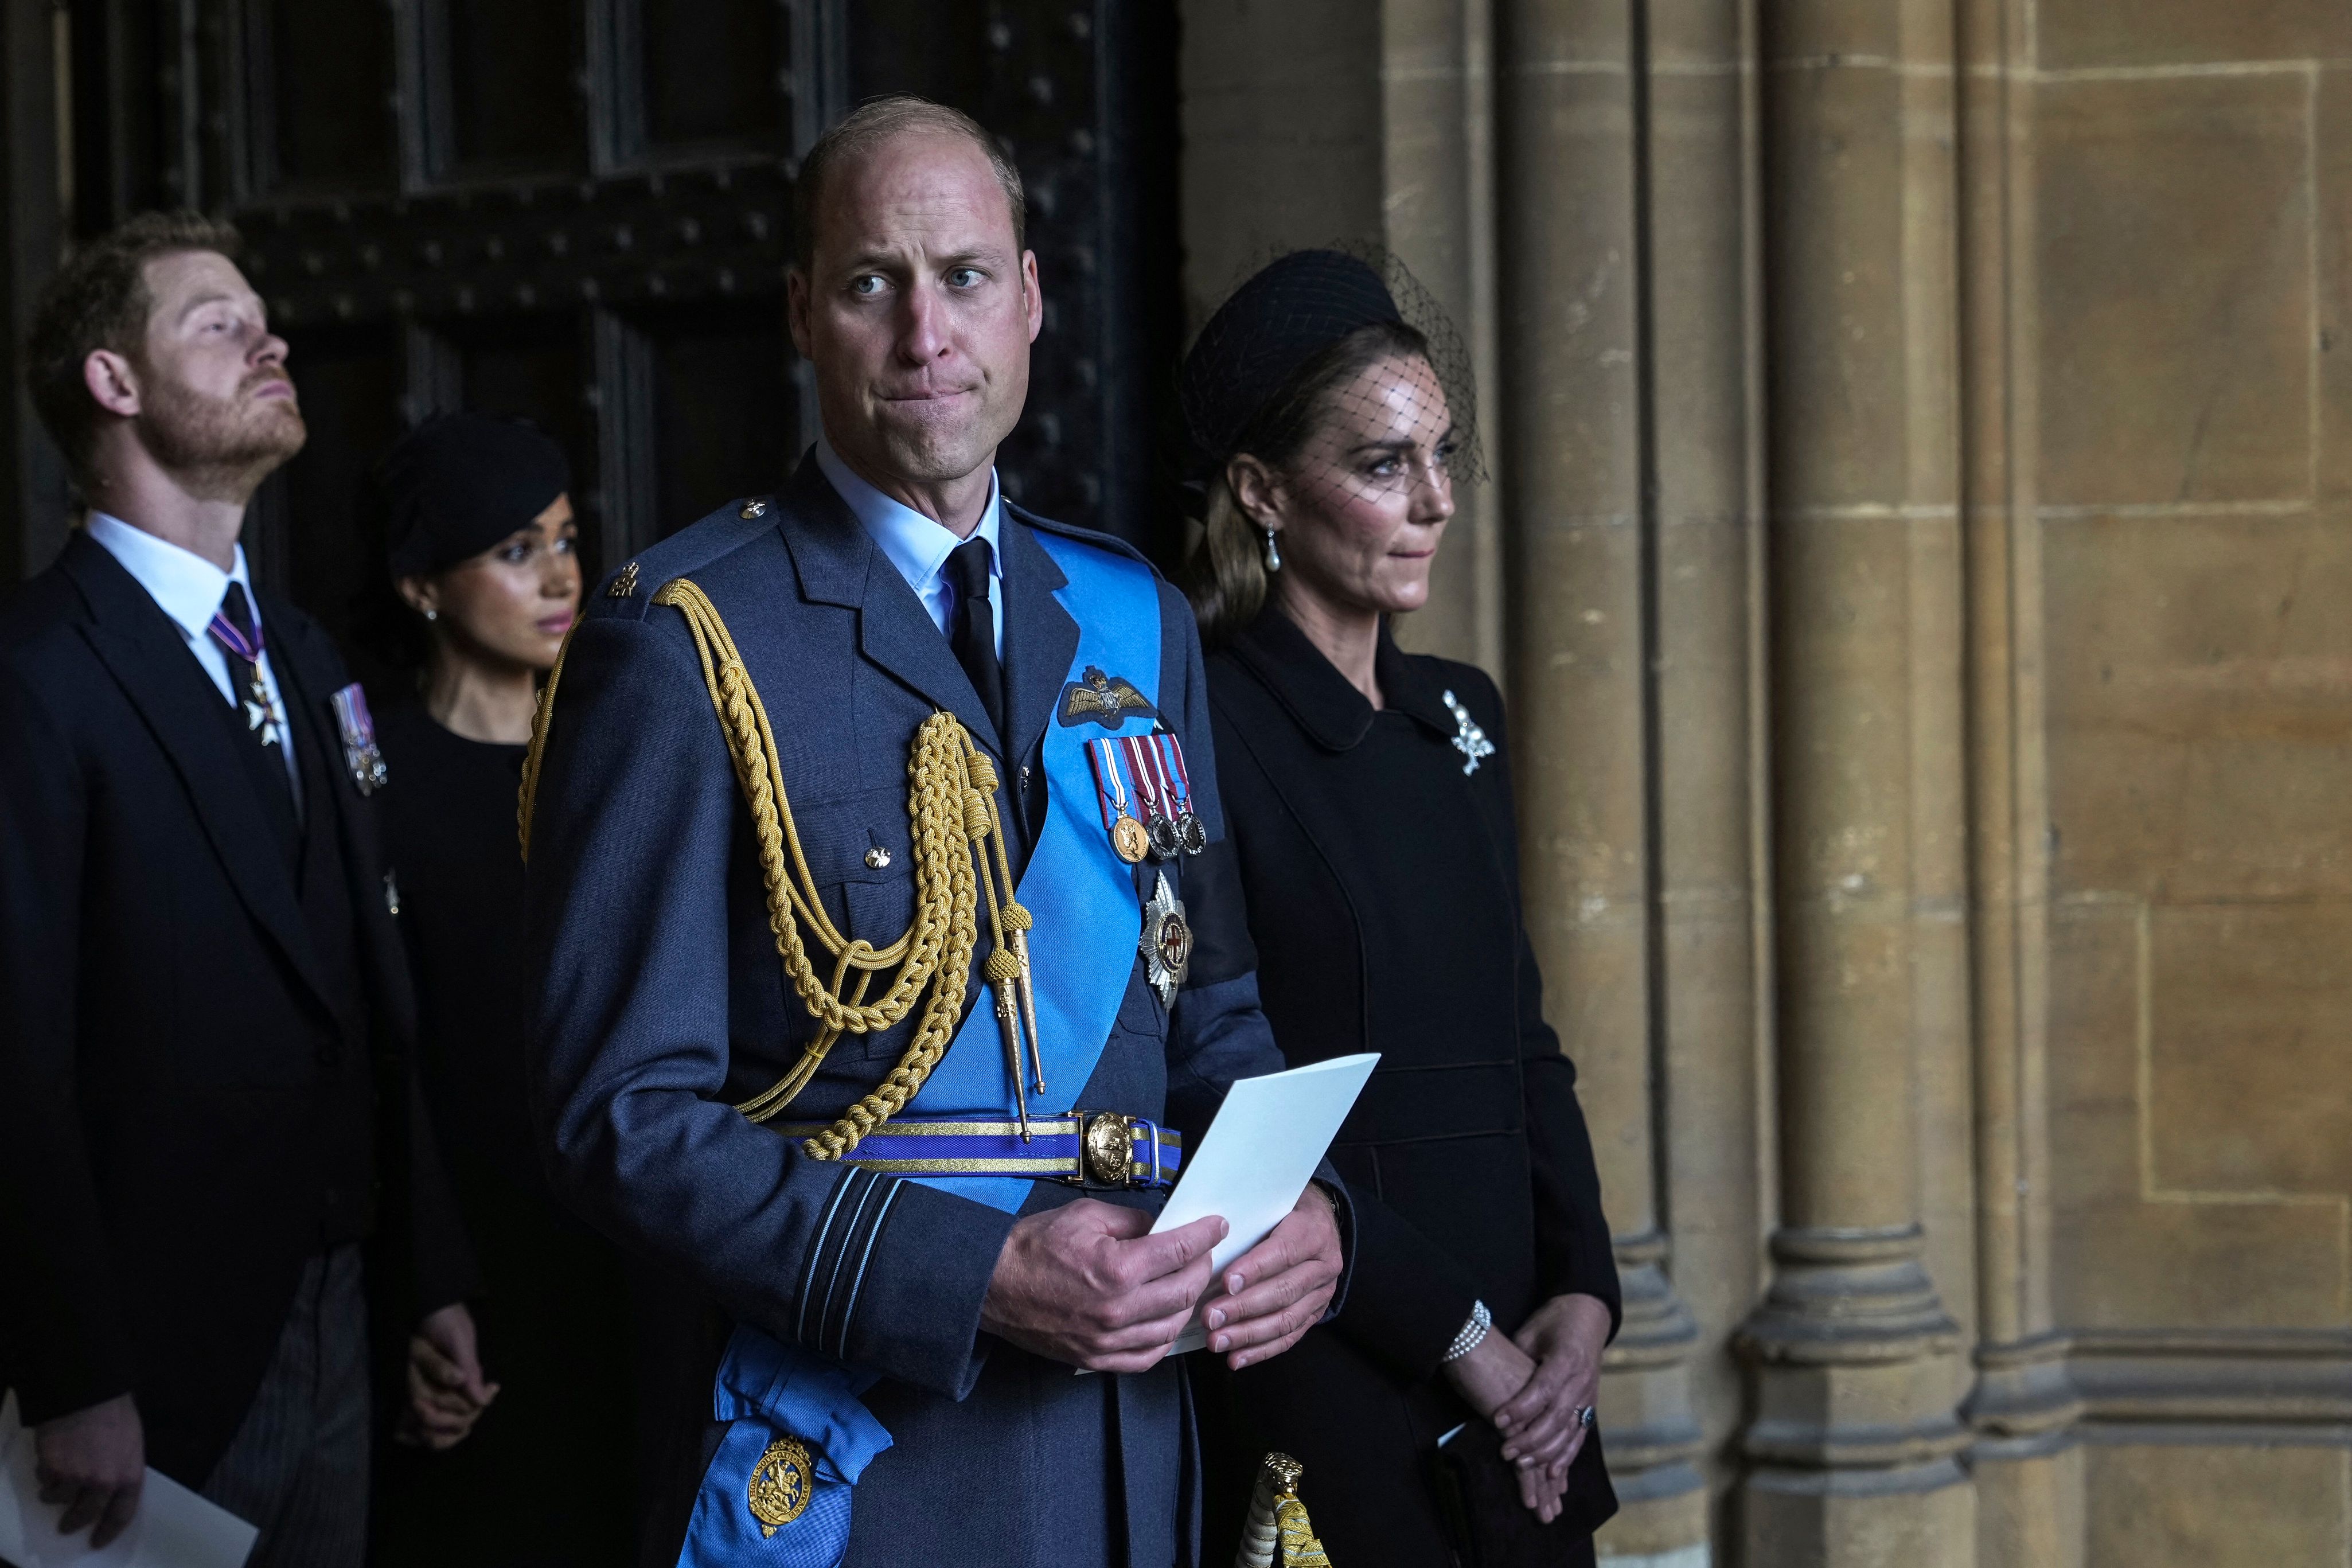 Prince William, Princess Catherine, Prince Harry, and Meghan Markle during the State Funeral of Queen Elizabeth II at Westminster Abbey on September 19, 2022 in London, England | Source: Getty Images